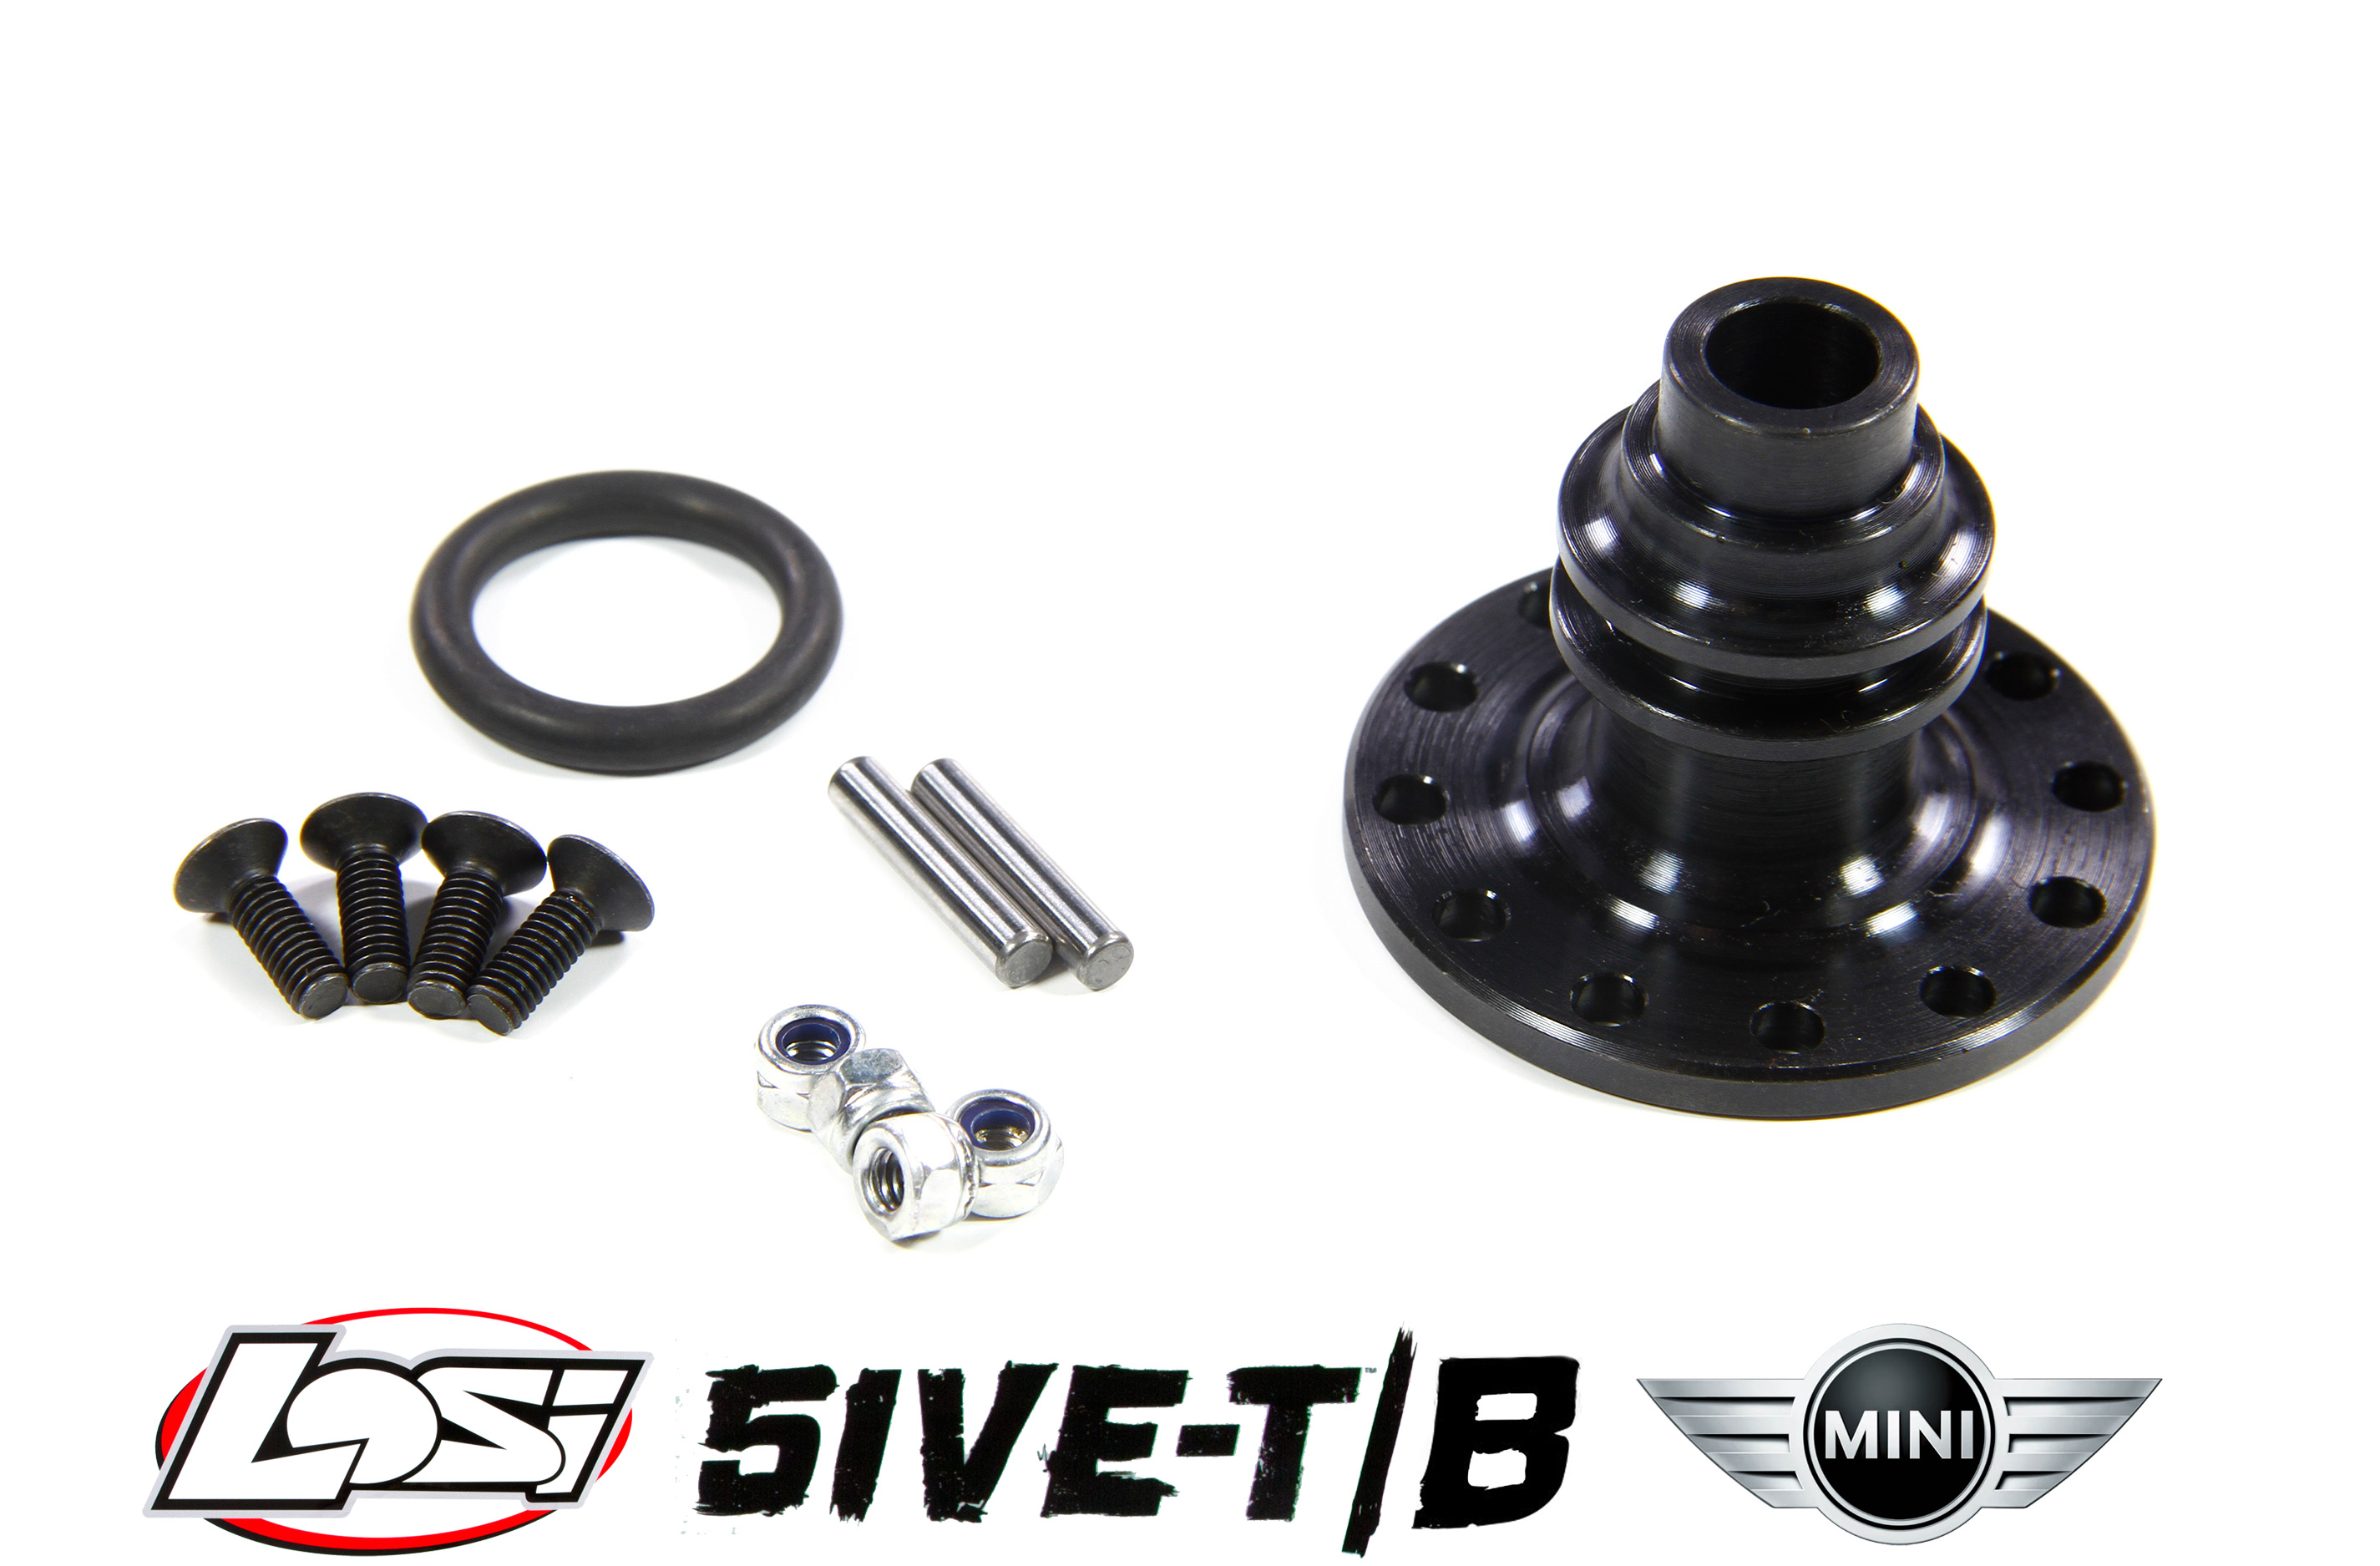 y1420 Diff Locker for Losi 5ive-T/2.0, 5ive-B and Mini